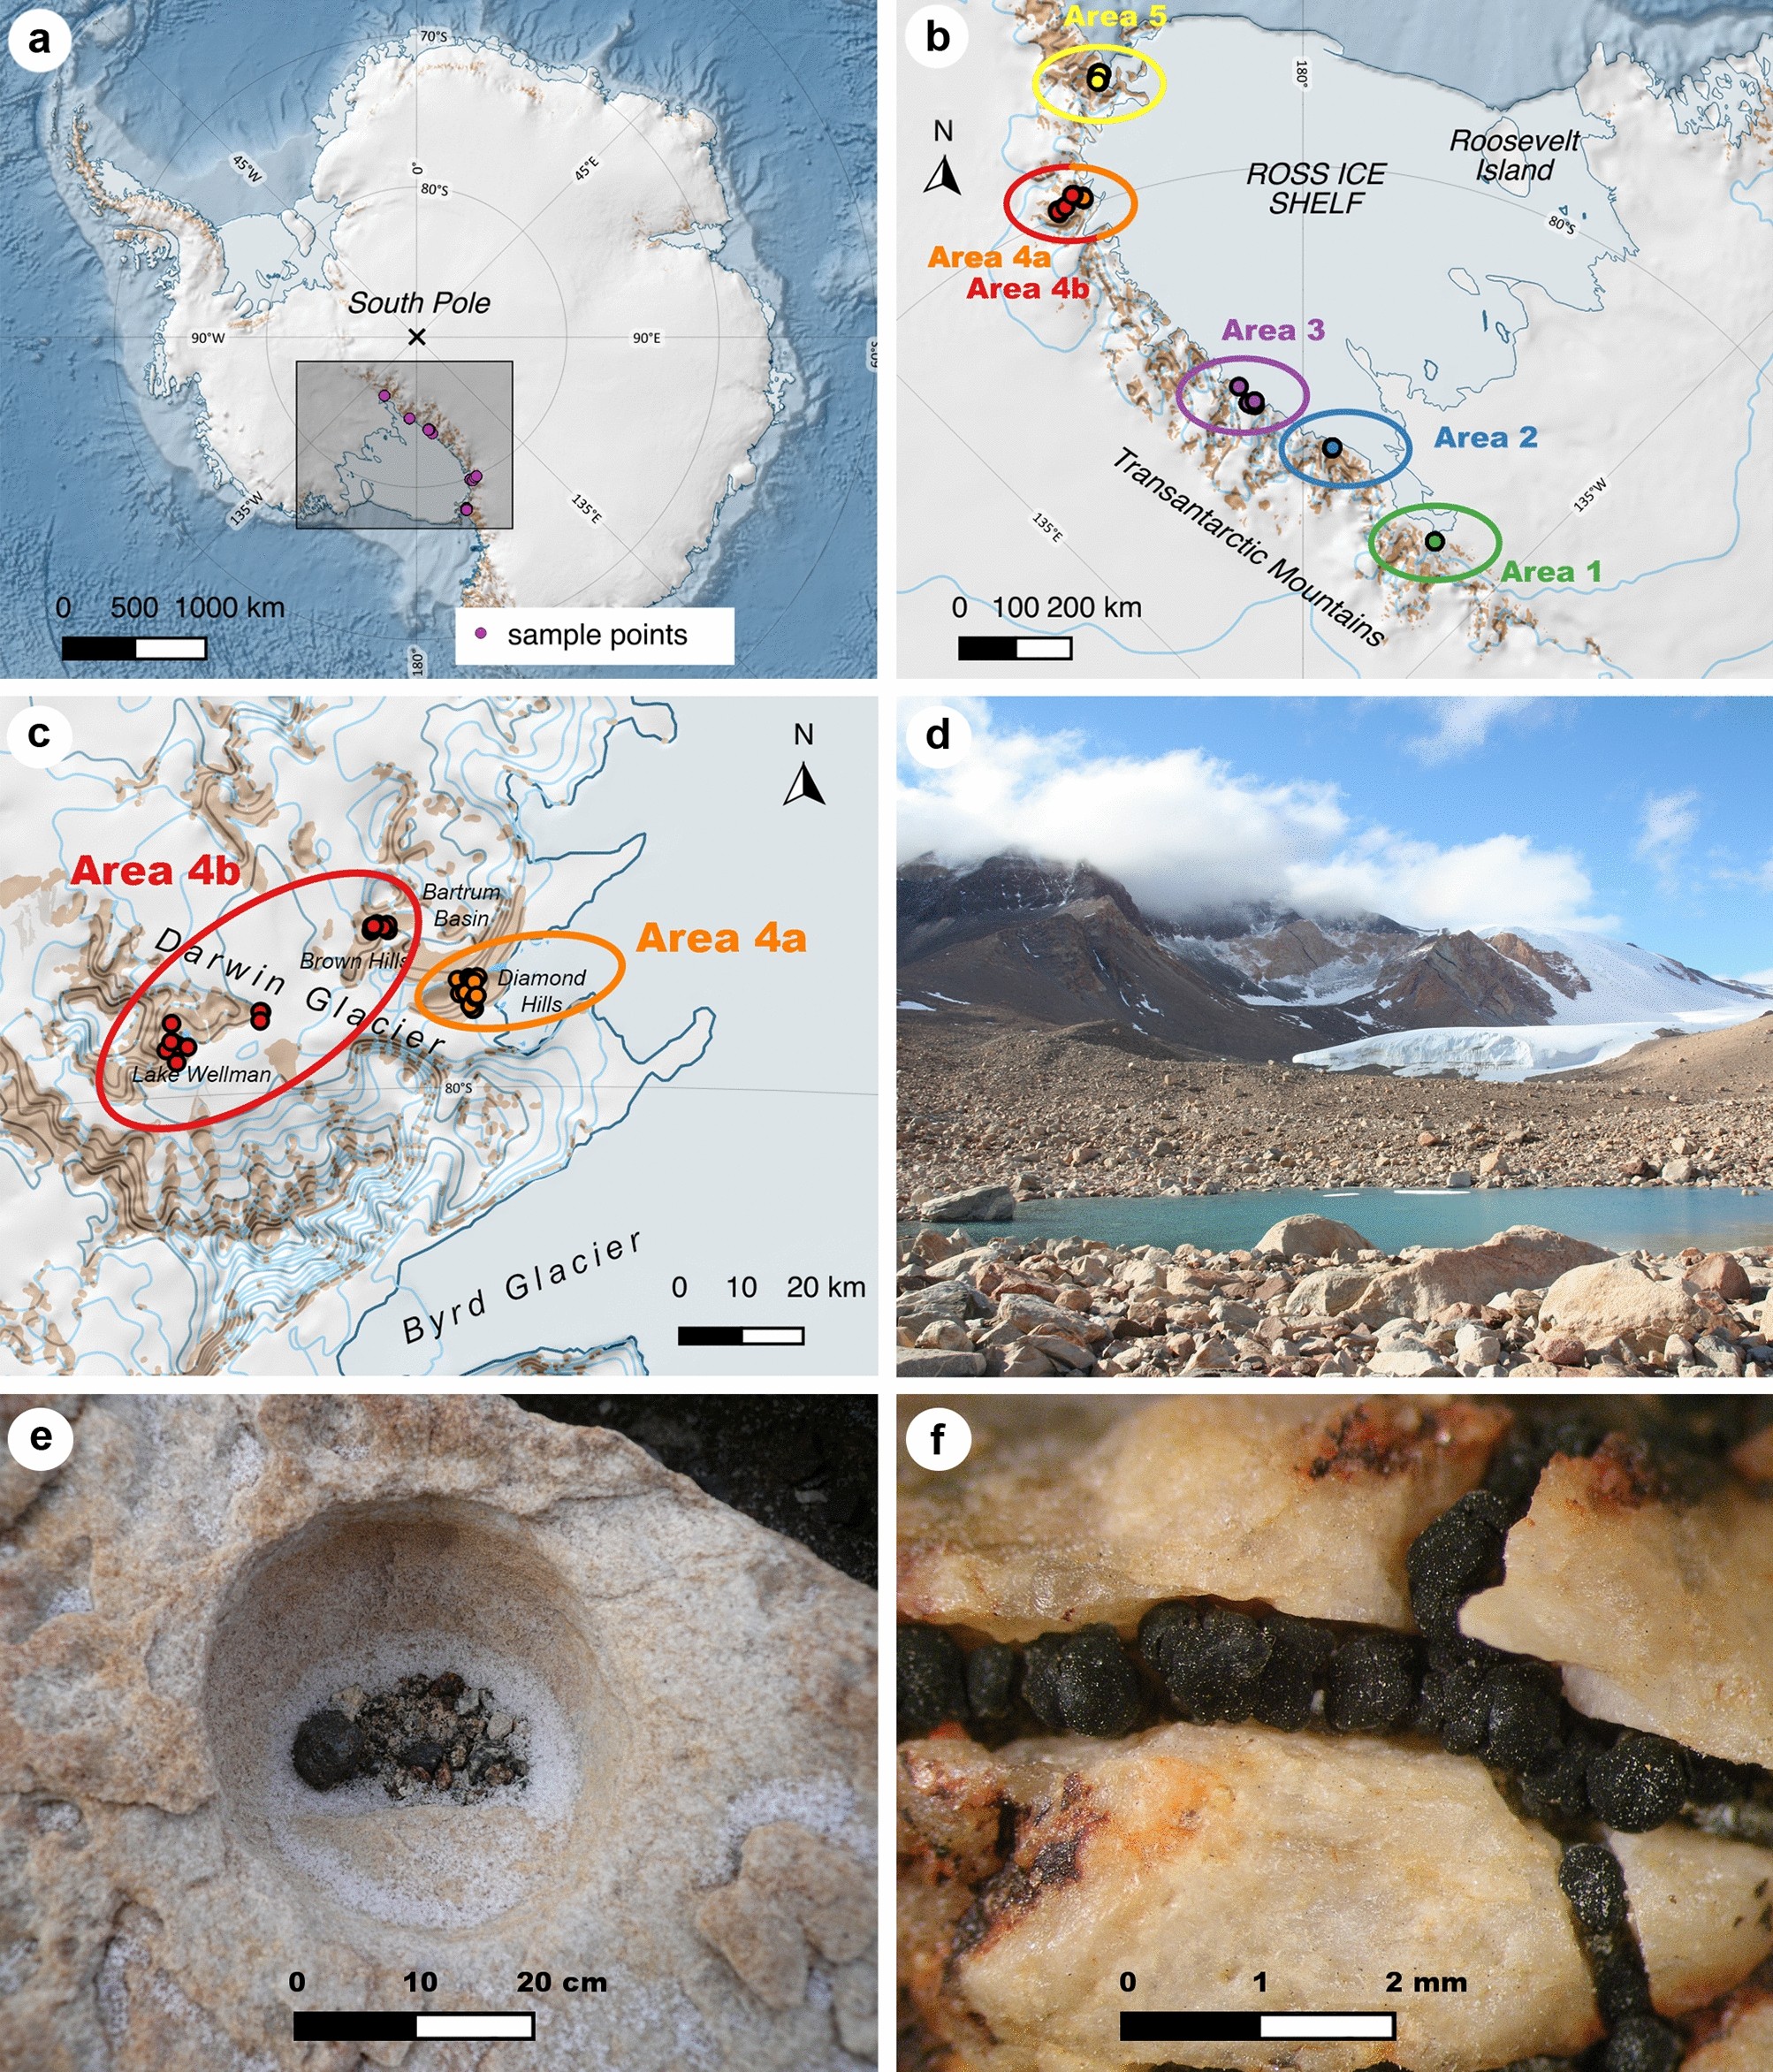 Macroclimatic conditions as main drivers for symbiotic association patterns  in lecideoid lichens along the Transantarctic Mountains, Ross Sea region,  Antarctica | Scientific Reports